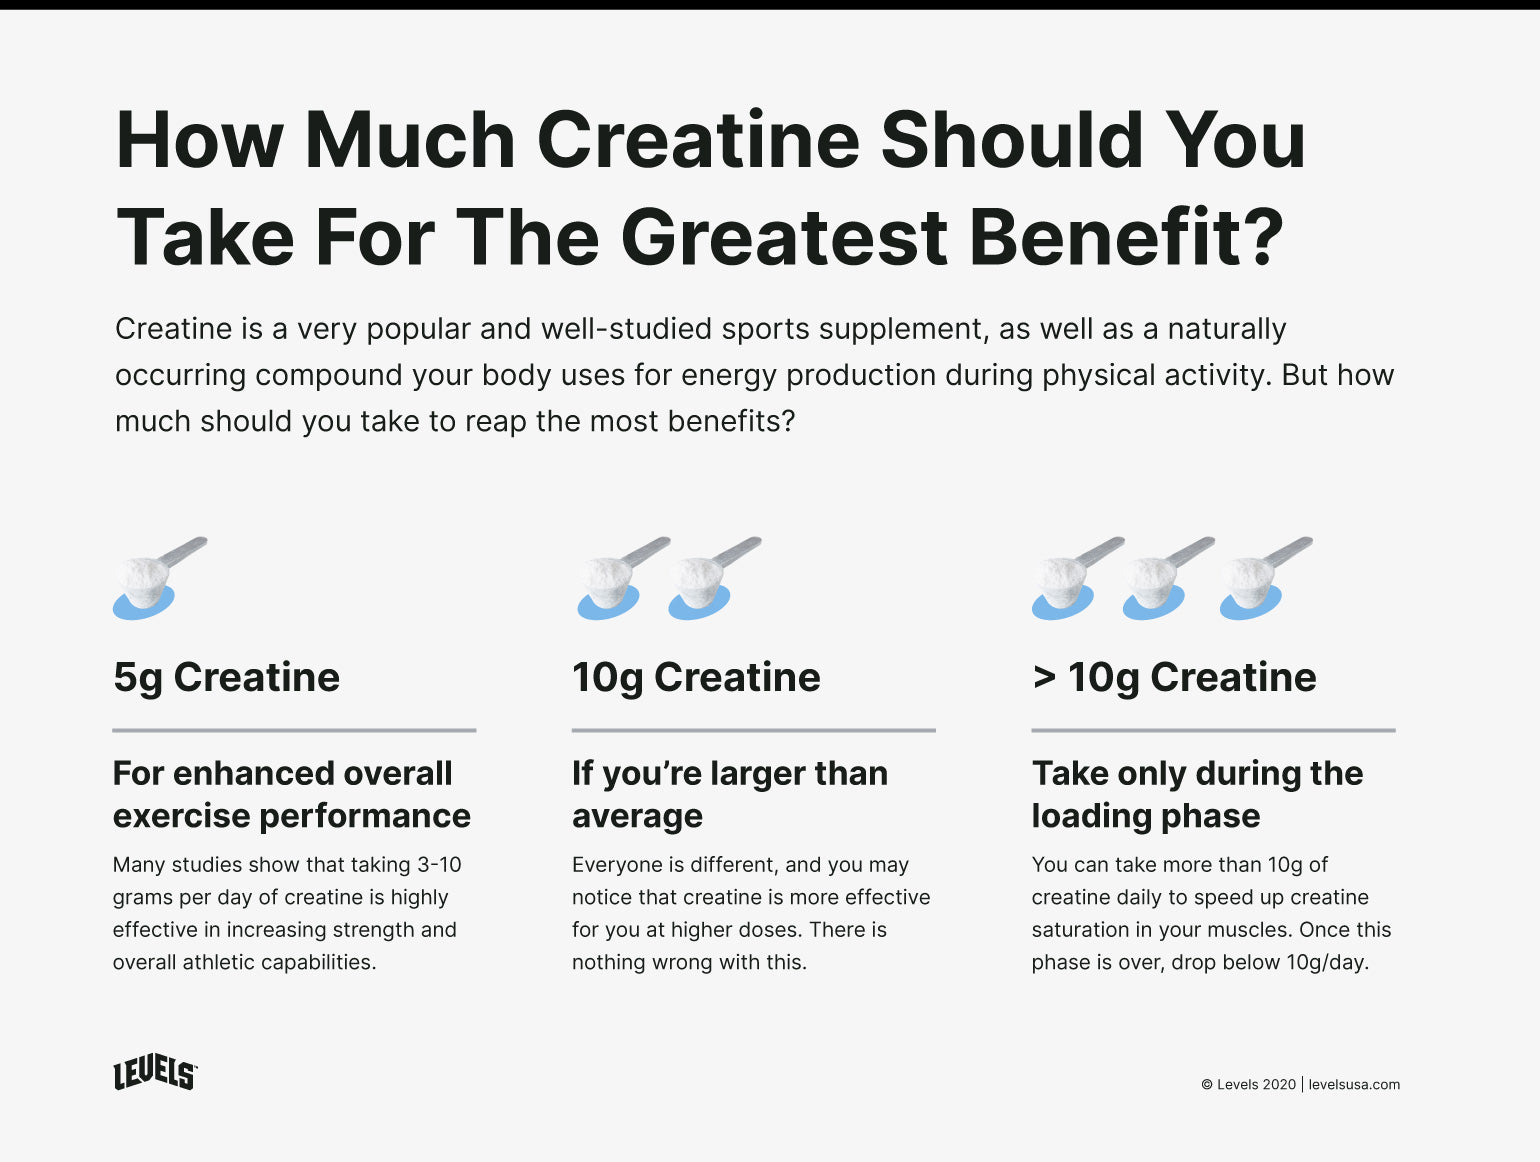 How Much Creatine For The Greatest Benefit - Infographic